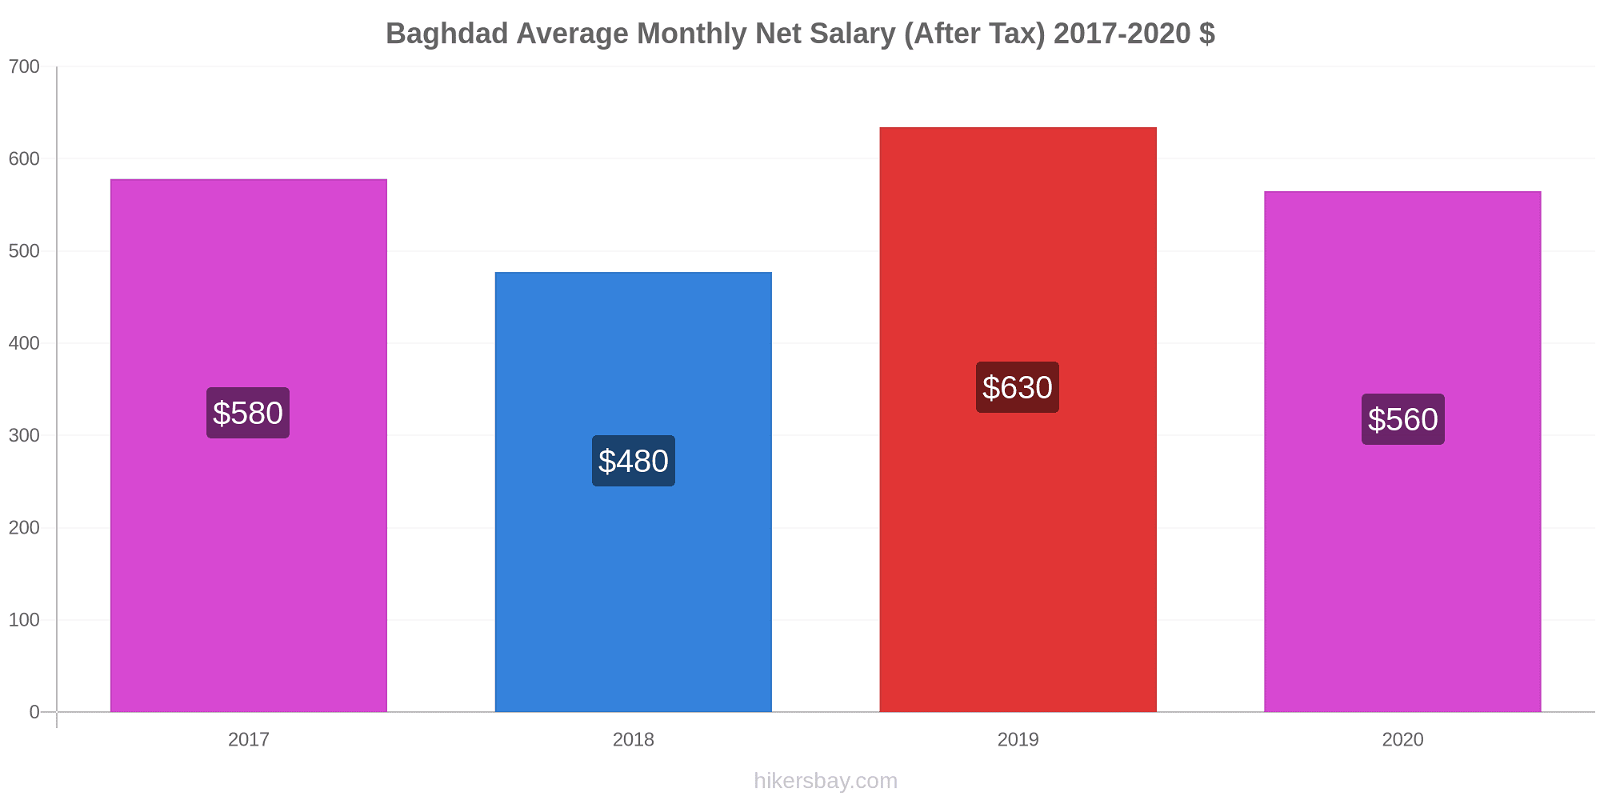 Baghdad price changes Average Monthly Net Salary (After Tax) hikersbay.com